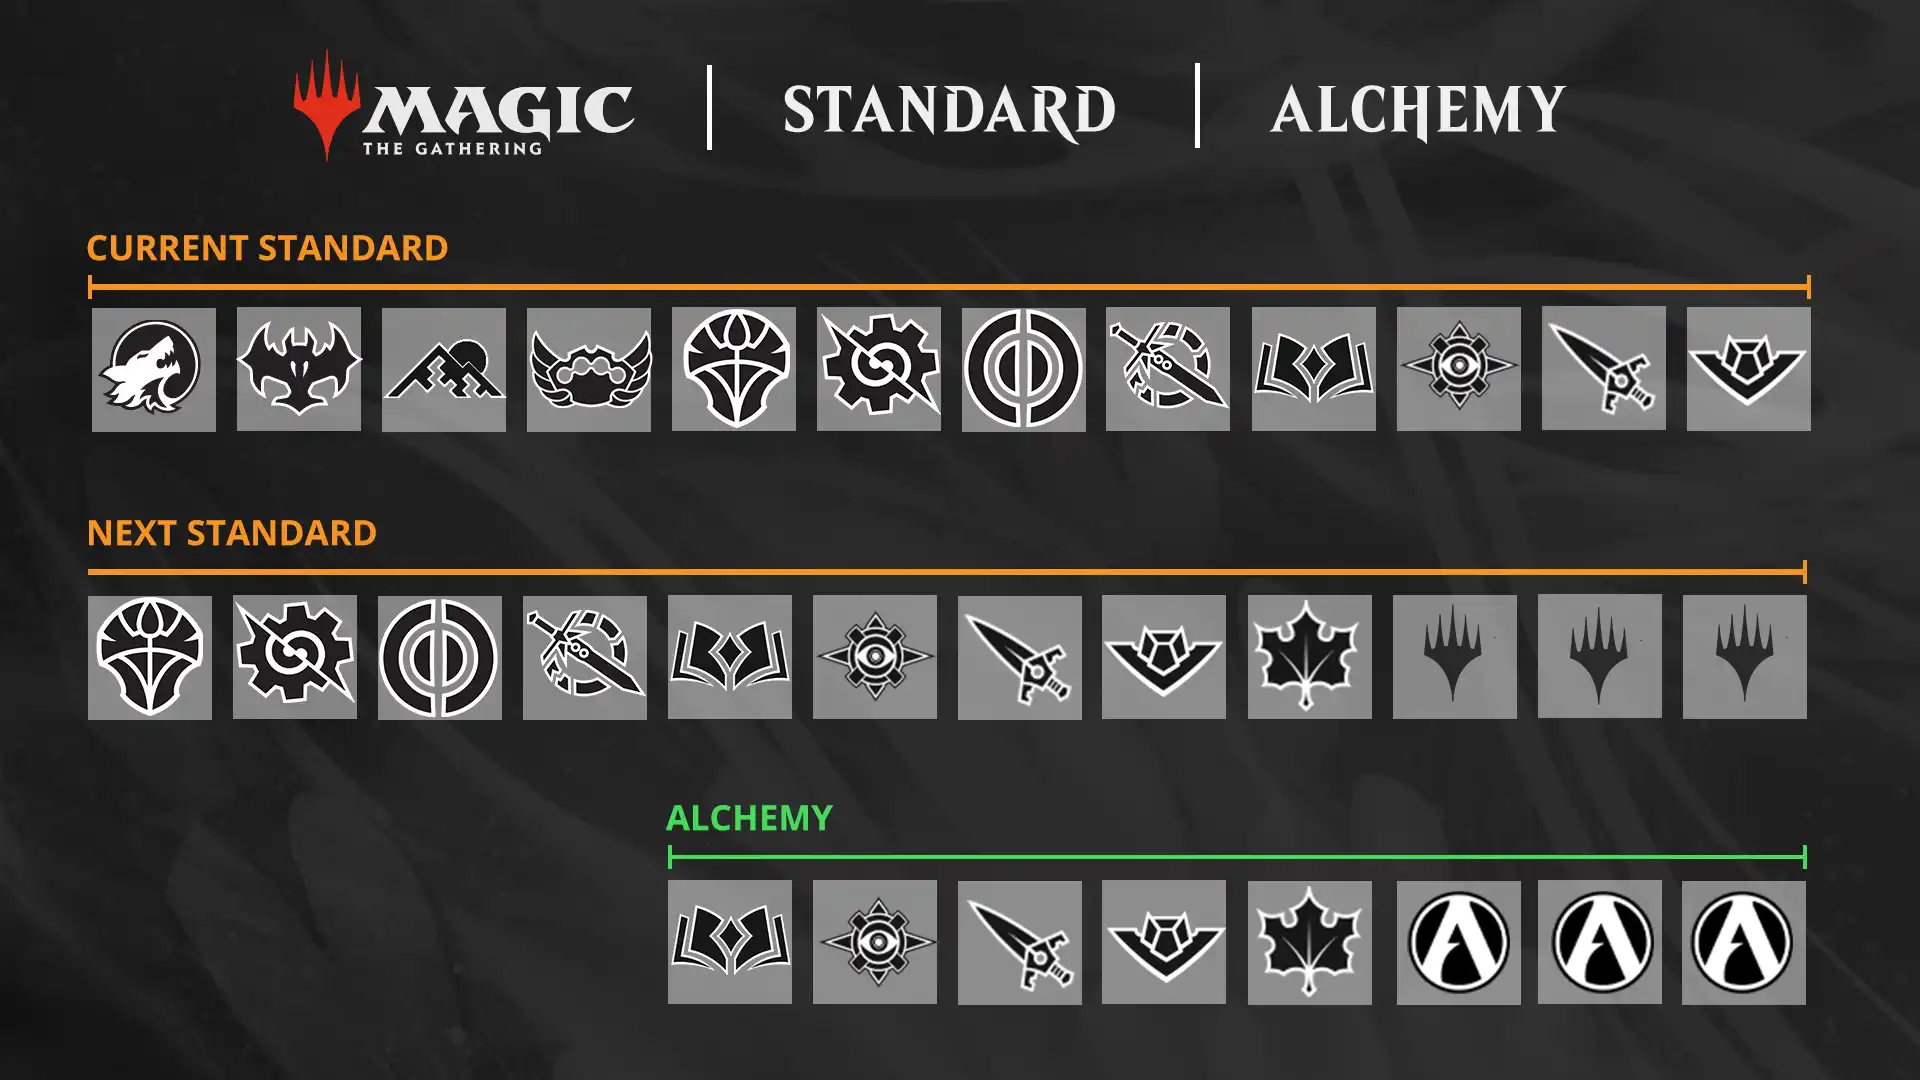 2024 rotation graphic showing set symbols for current Standard, next Standard and what rotates in, and Alchemy's rotation for 2024